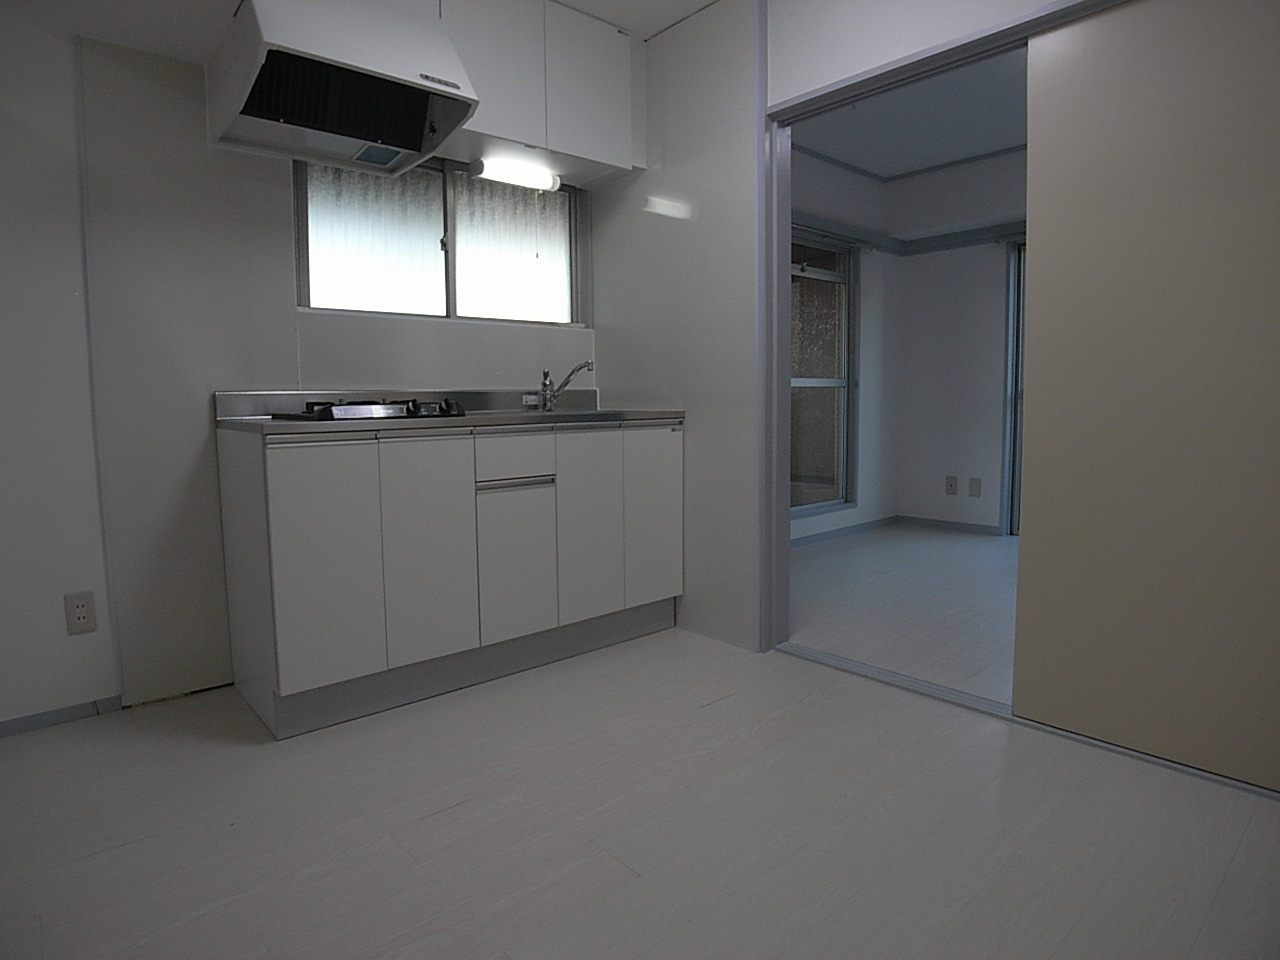 Living and room. It is renovated in the clean room